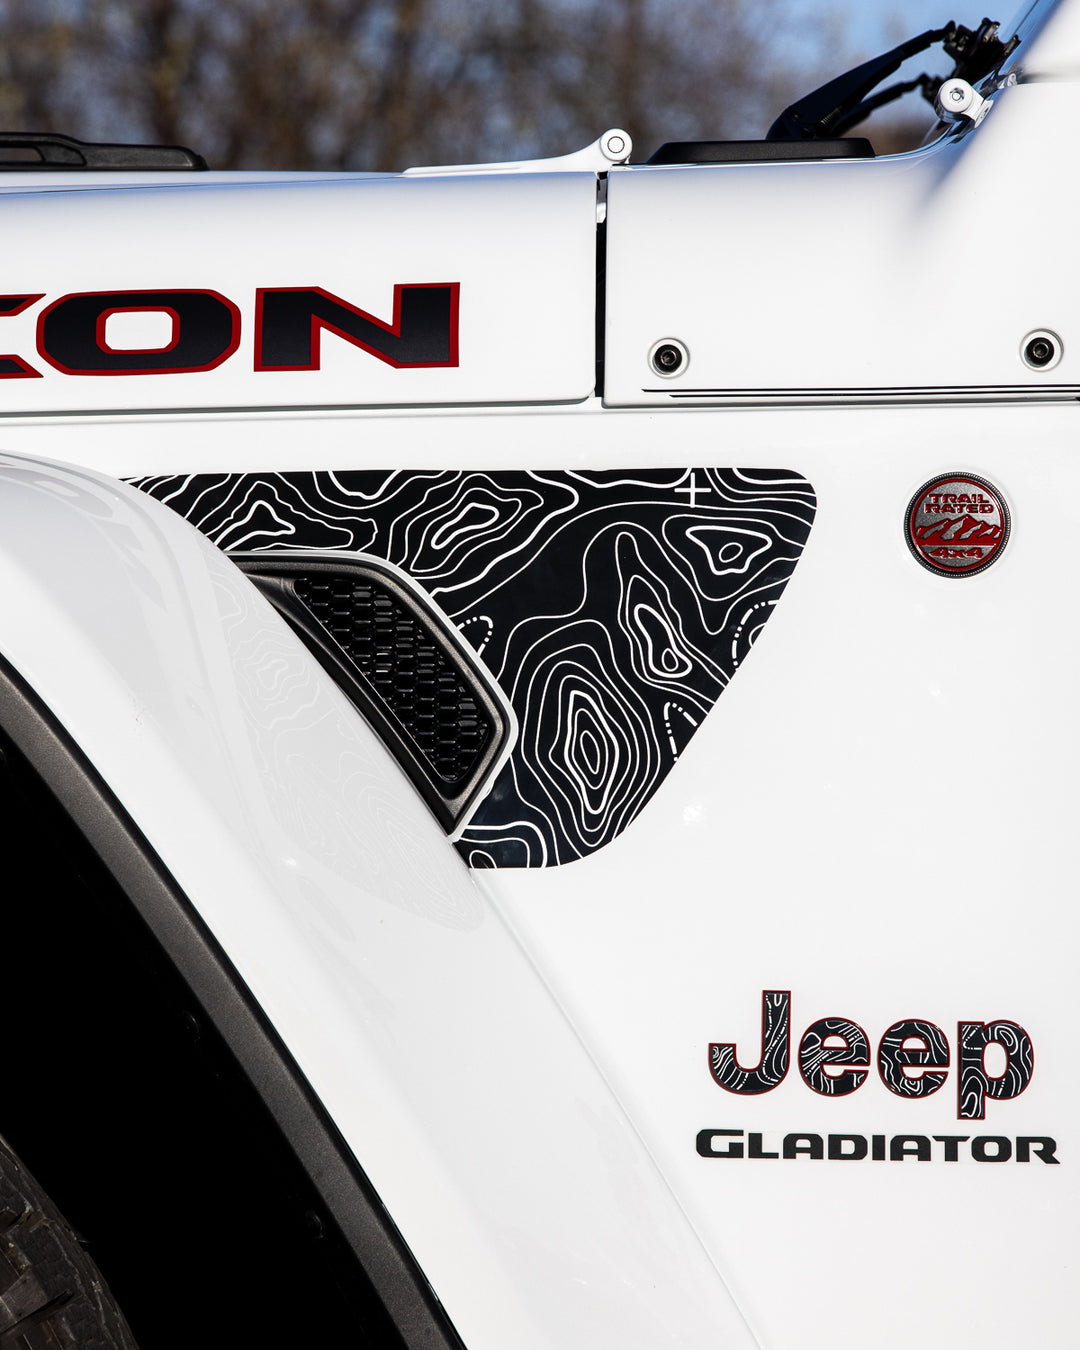 Image of jeep with custom hood and body lettering.